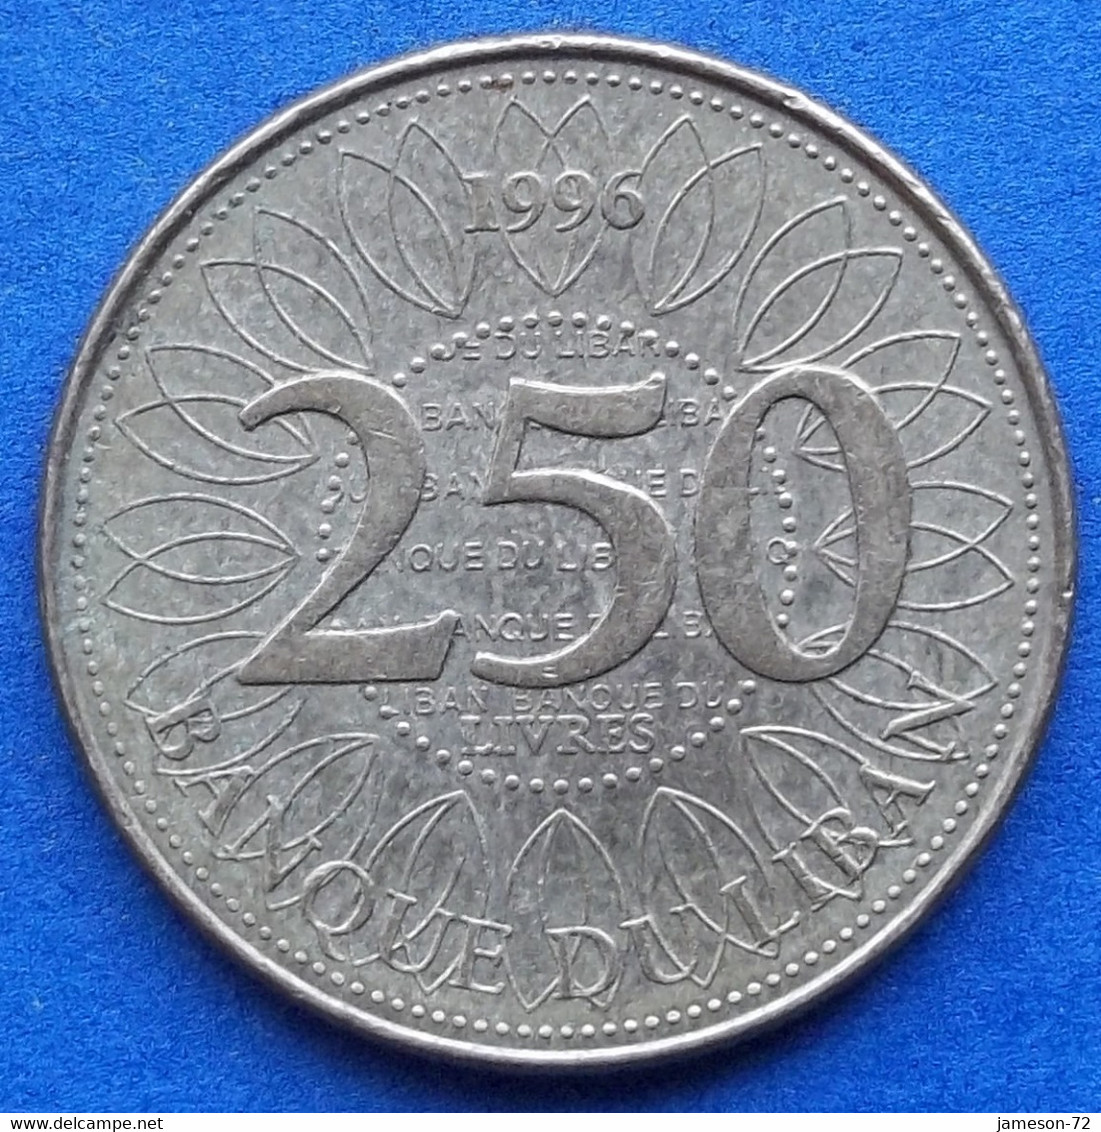 LEBANON - 250 Livres 1996 KM# 36 Independent Republic - Edelweiss Coins - Libano